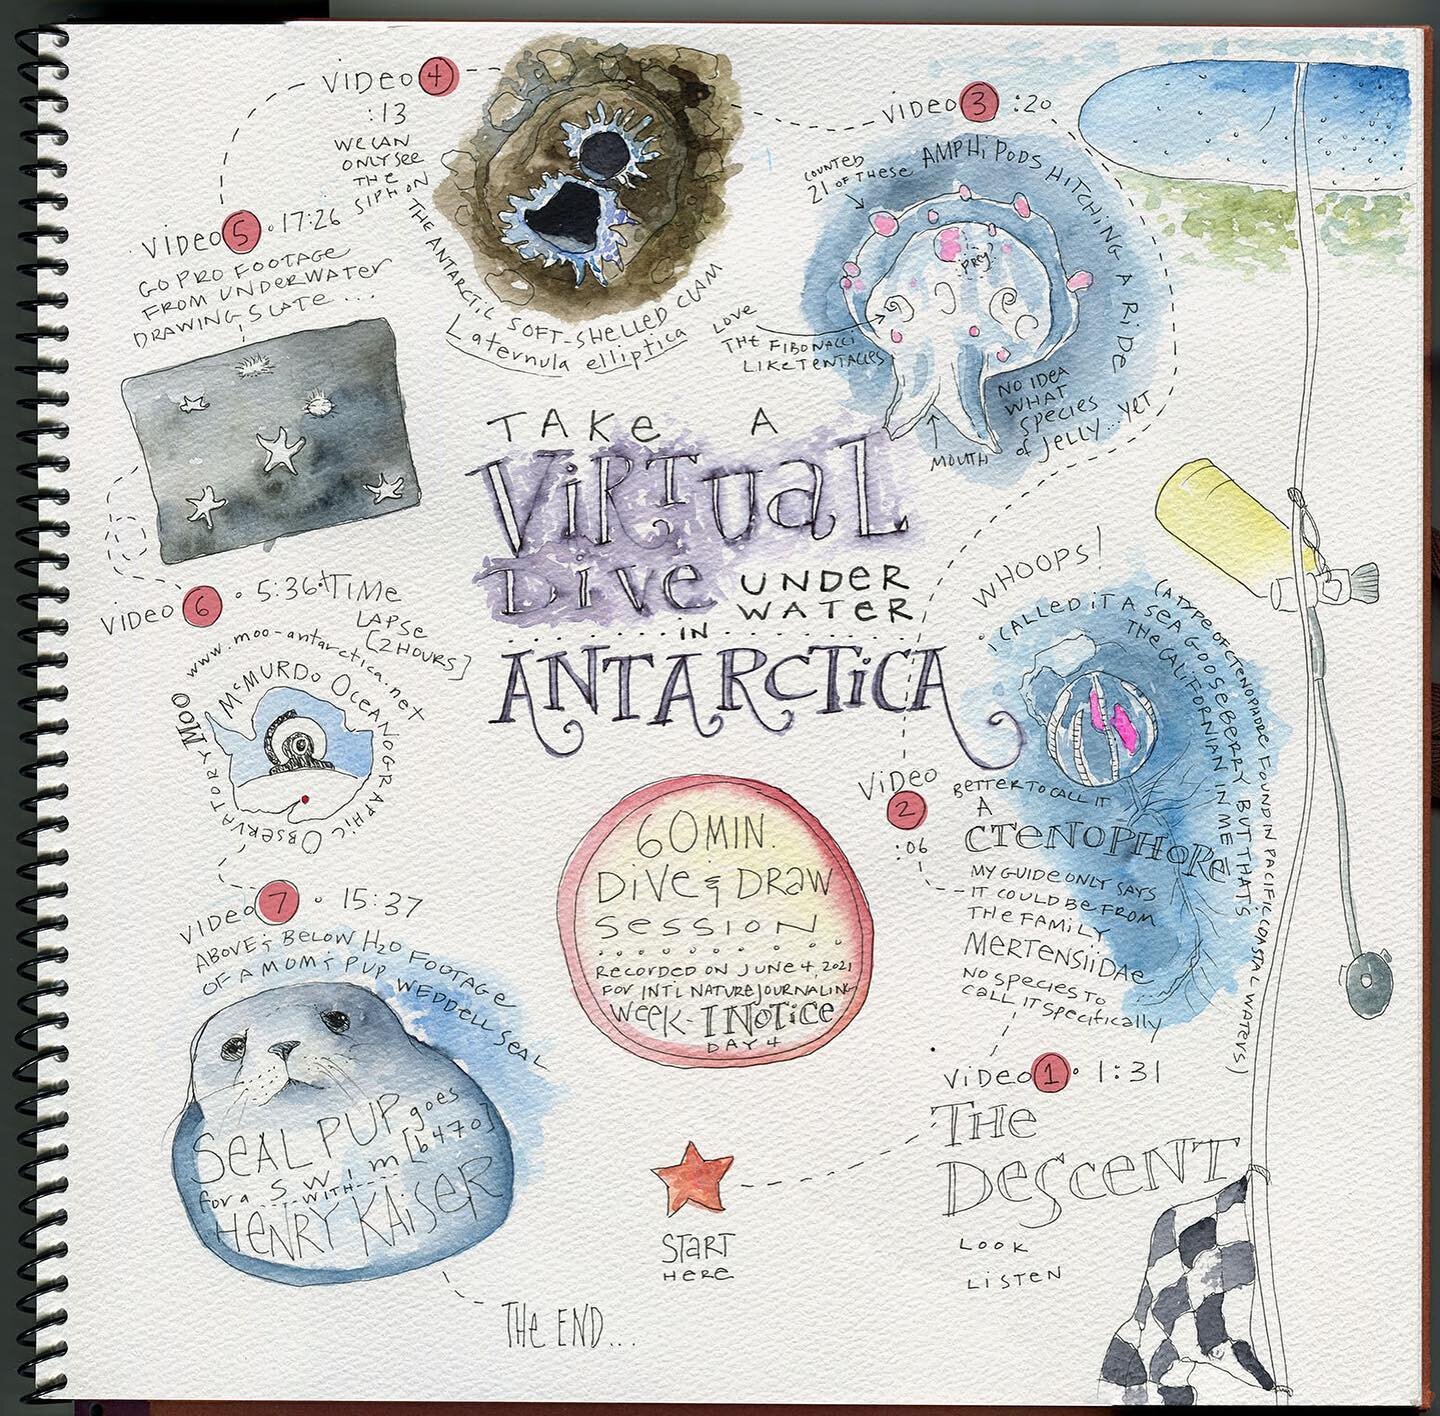 Today I did my own virtual dive &amp; draw session | Last week I did a workshop with @journalingwithnature
International Nature Journaling Week

There are some amazing free recorded workshops! Visit @journalingwithnature for more details.

On June 4,